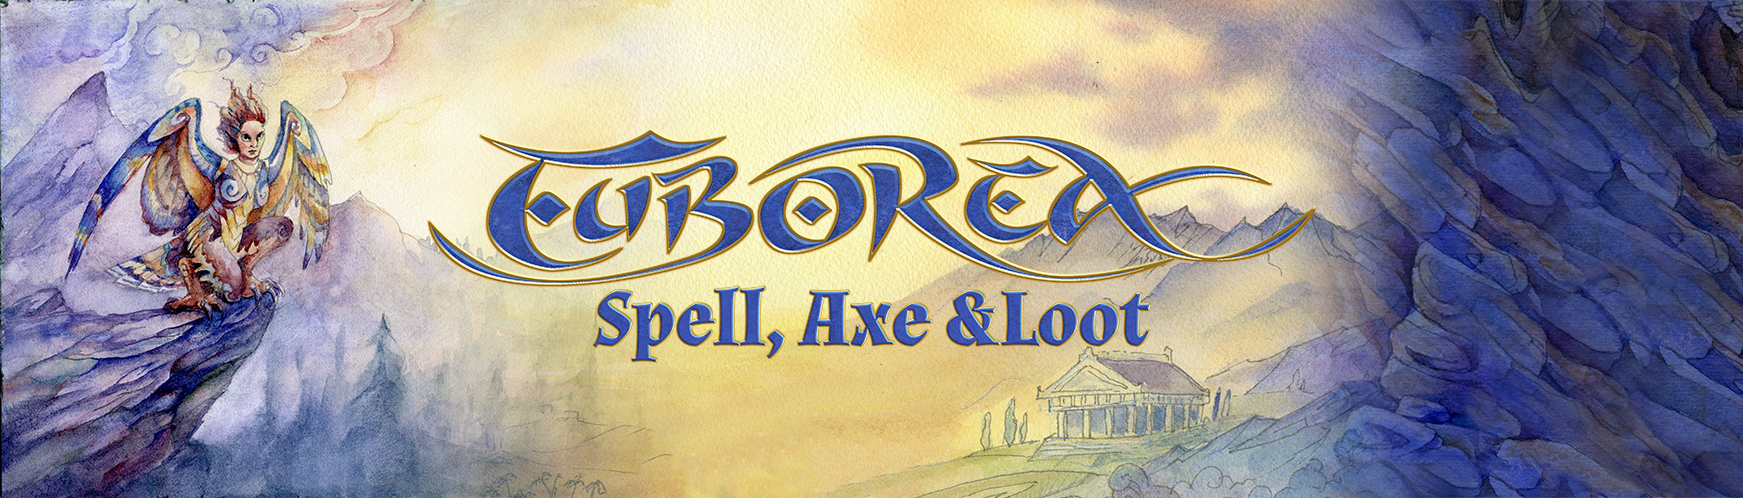 Welcome to the Late Pledge for Euborea - Spell, Axe & Loot! 